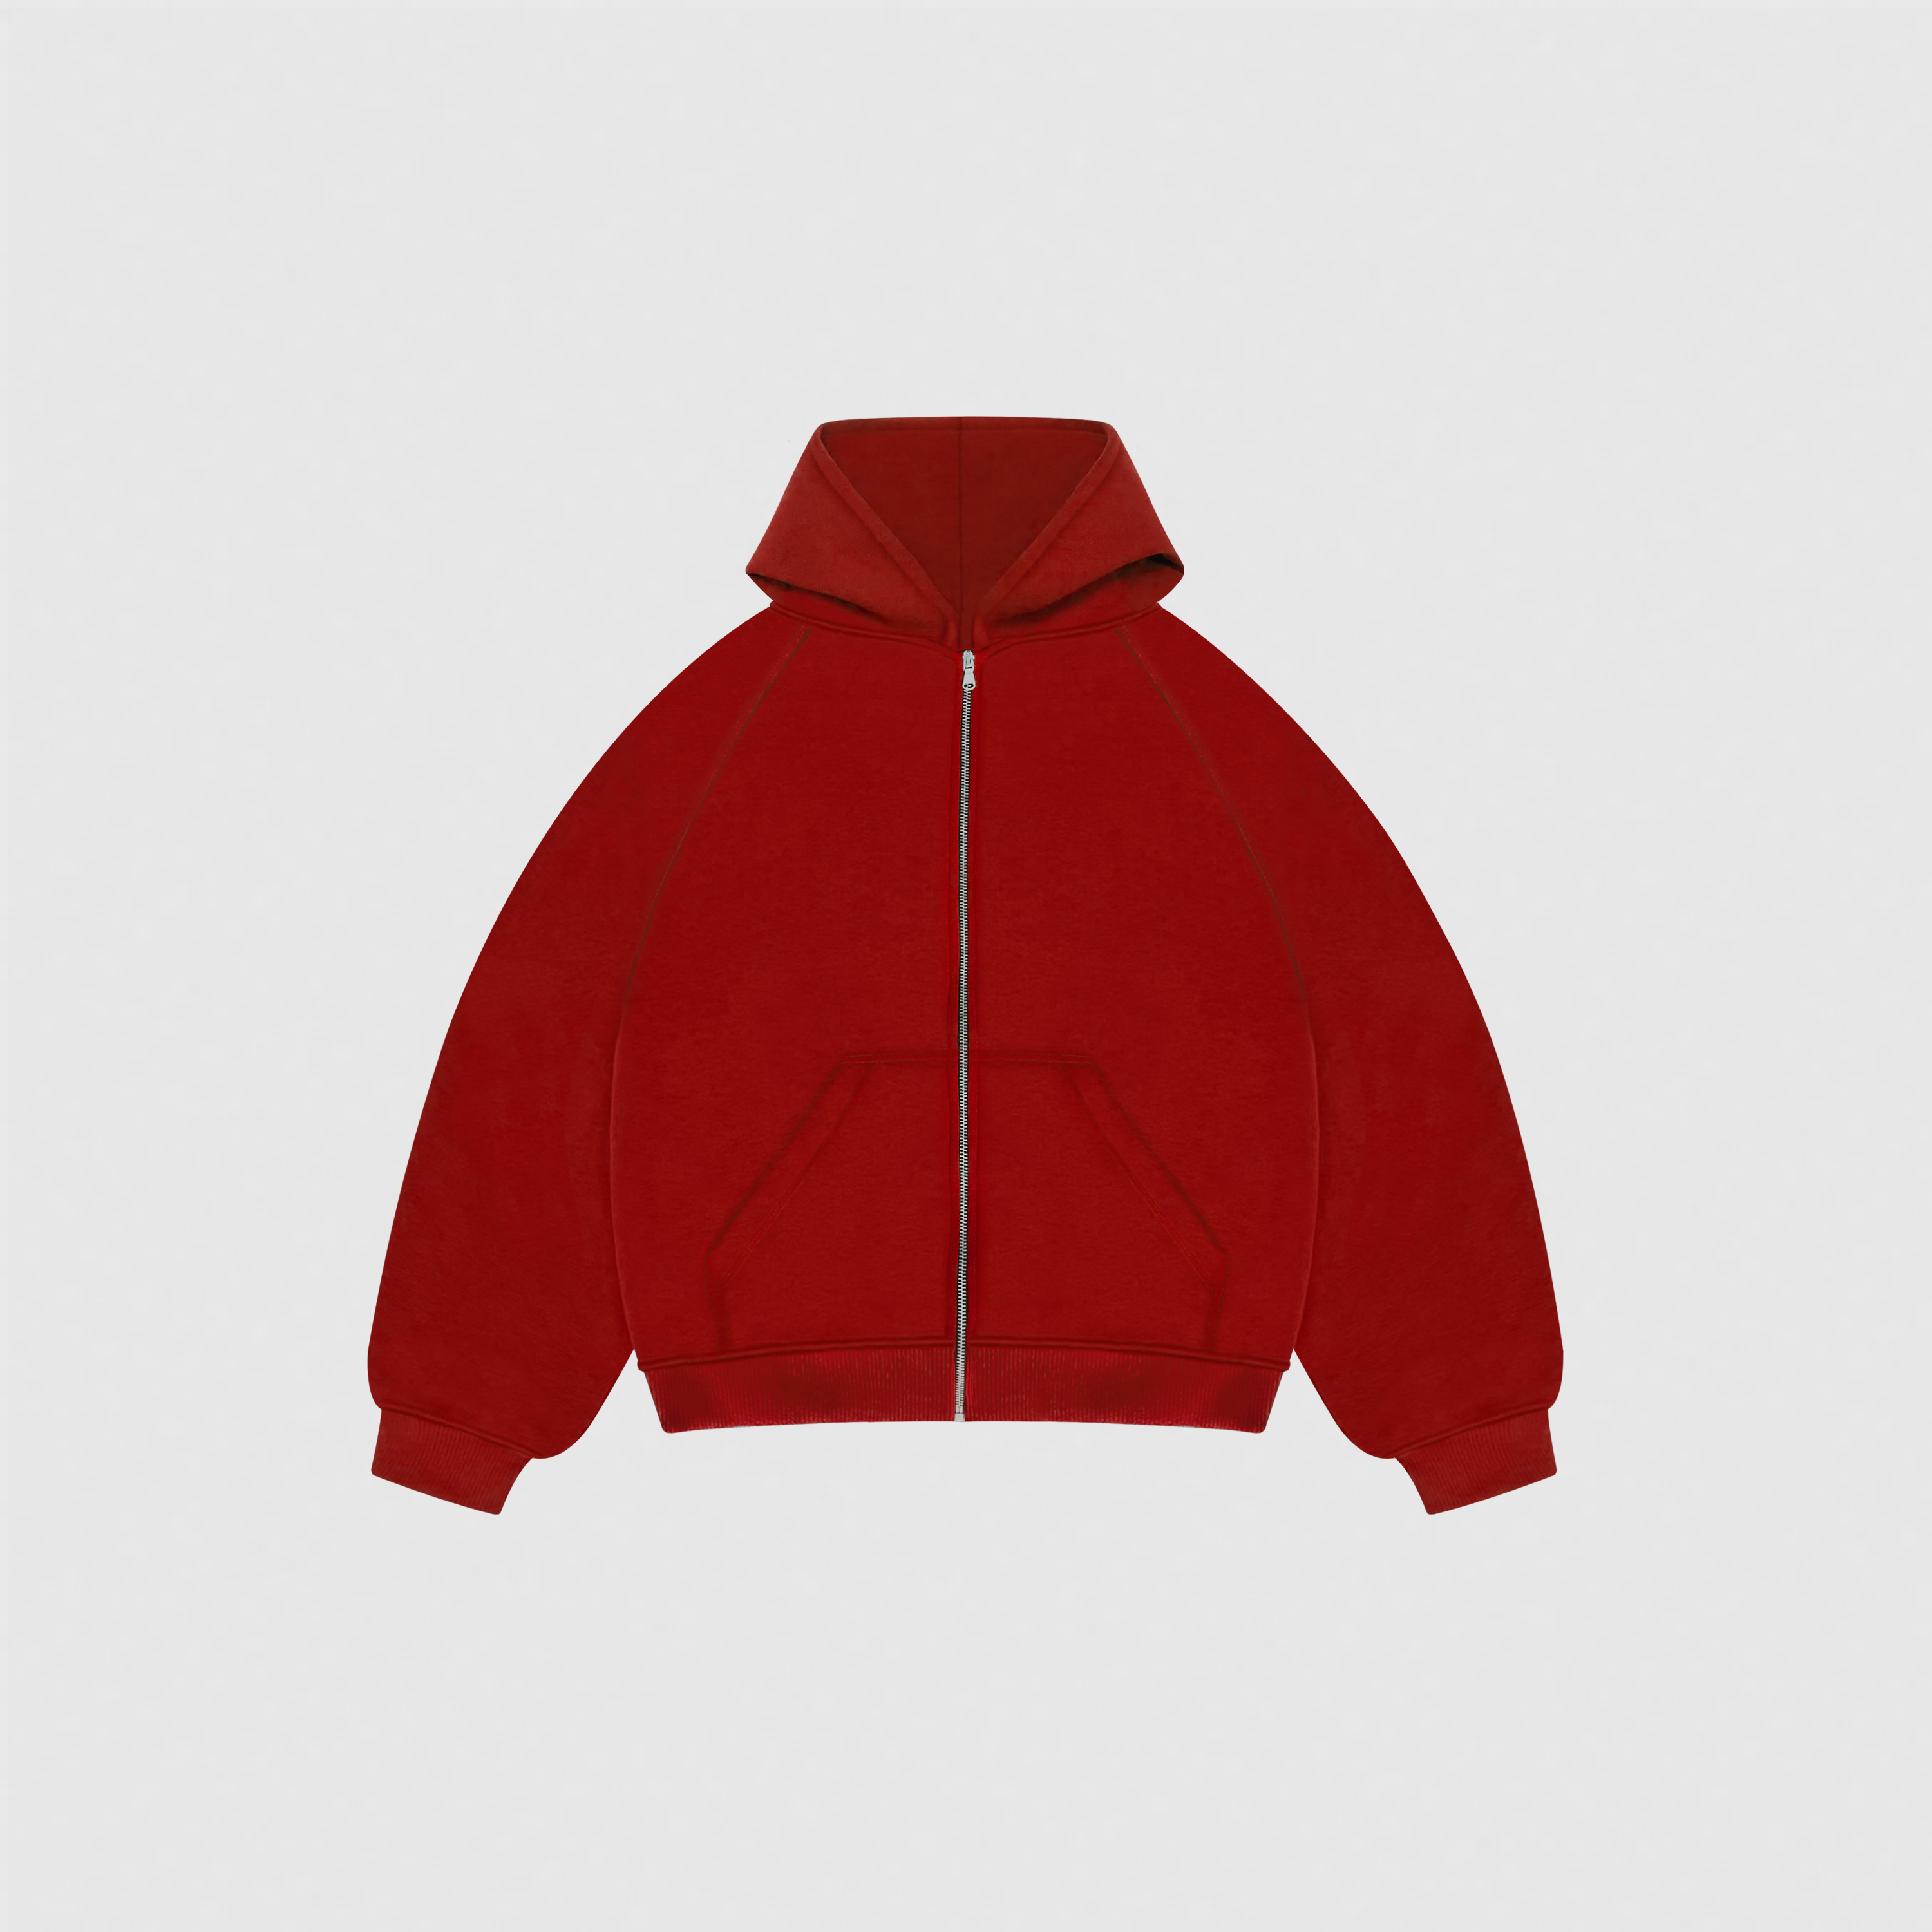 EVERYDAY OXIDE RED ZIP HOODIE-Hoodie-Lomalab-2X-SMALL-Red-Lomalab